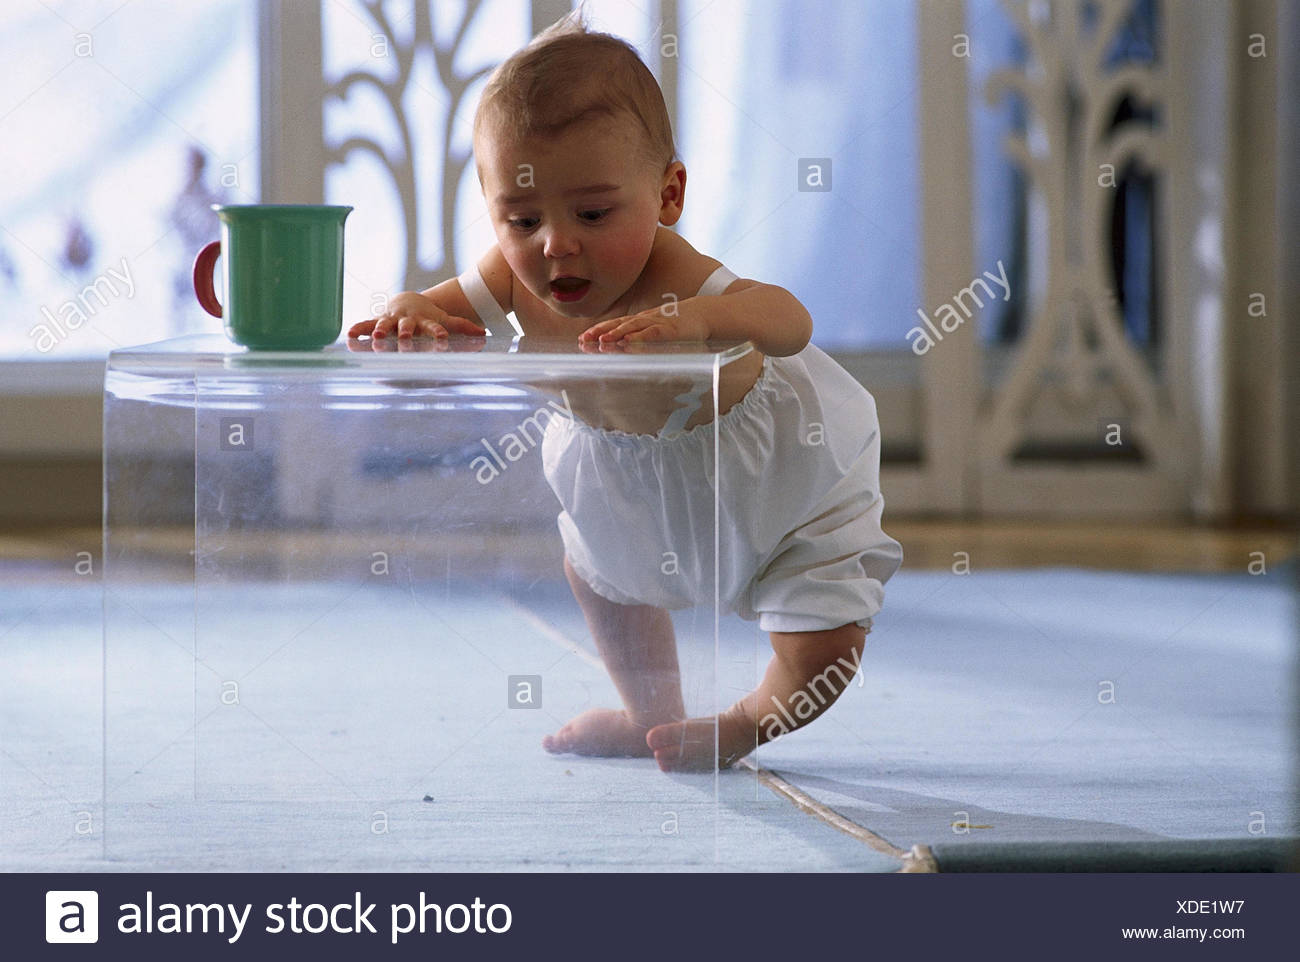 help baby learn to stand